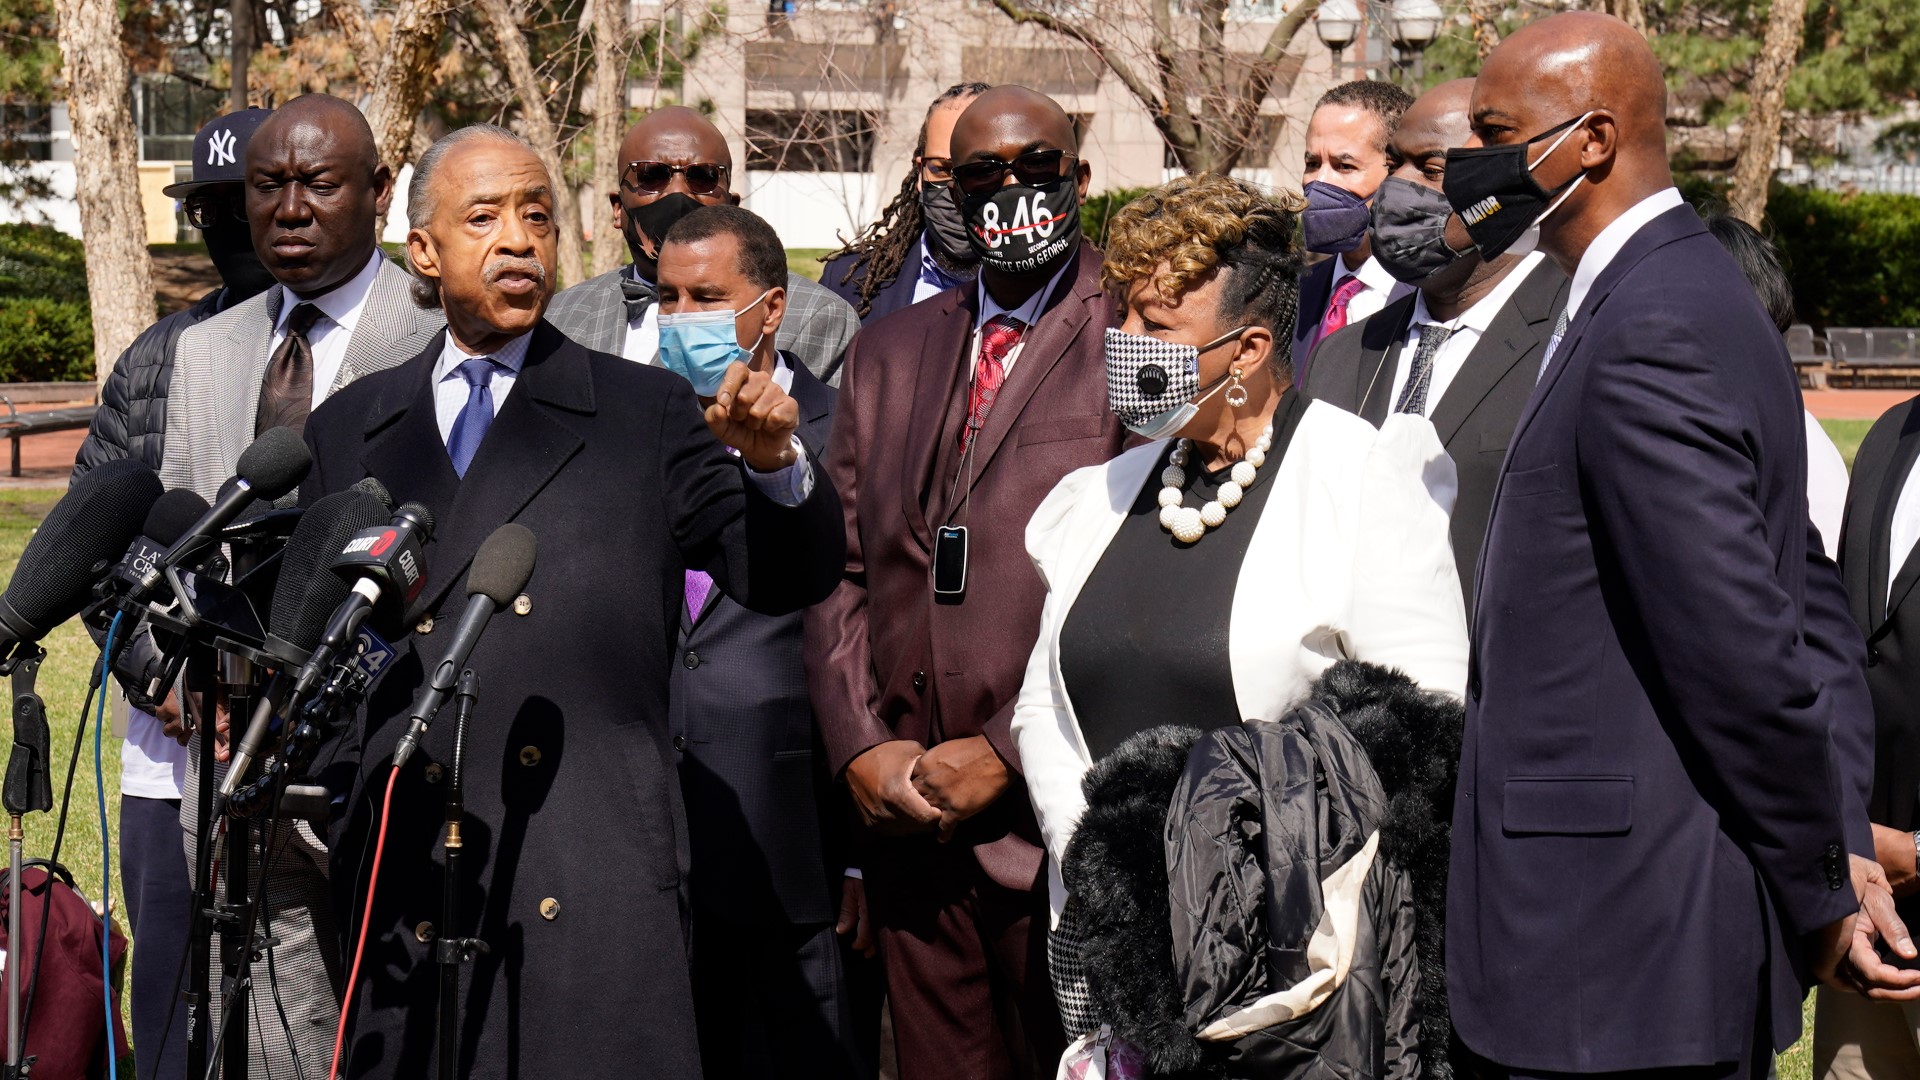 The city's $27 million settlement with Floyd's family will not even be brought up over the course of the trial.